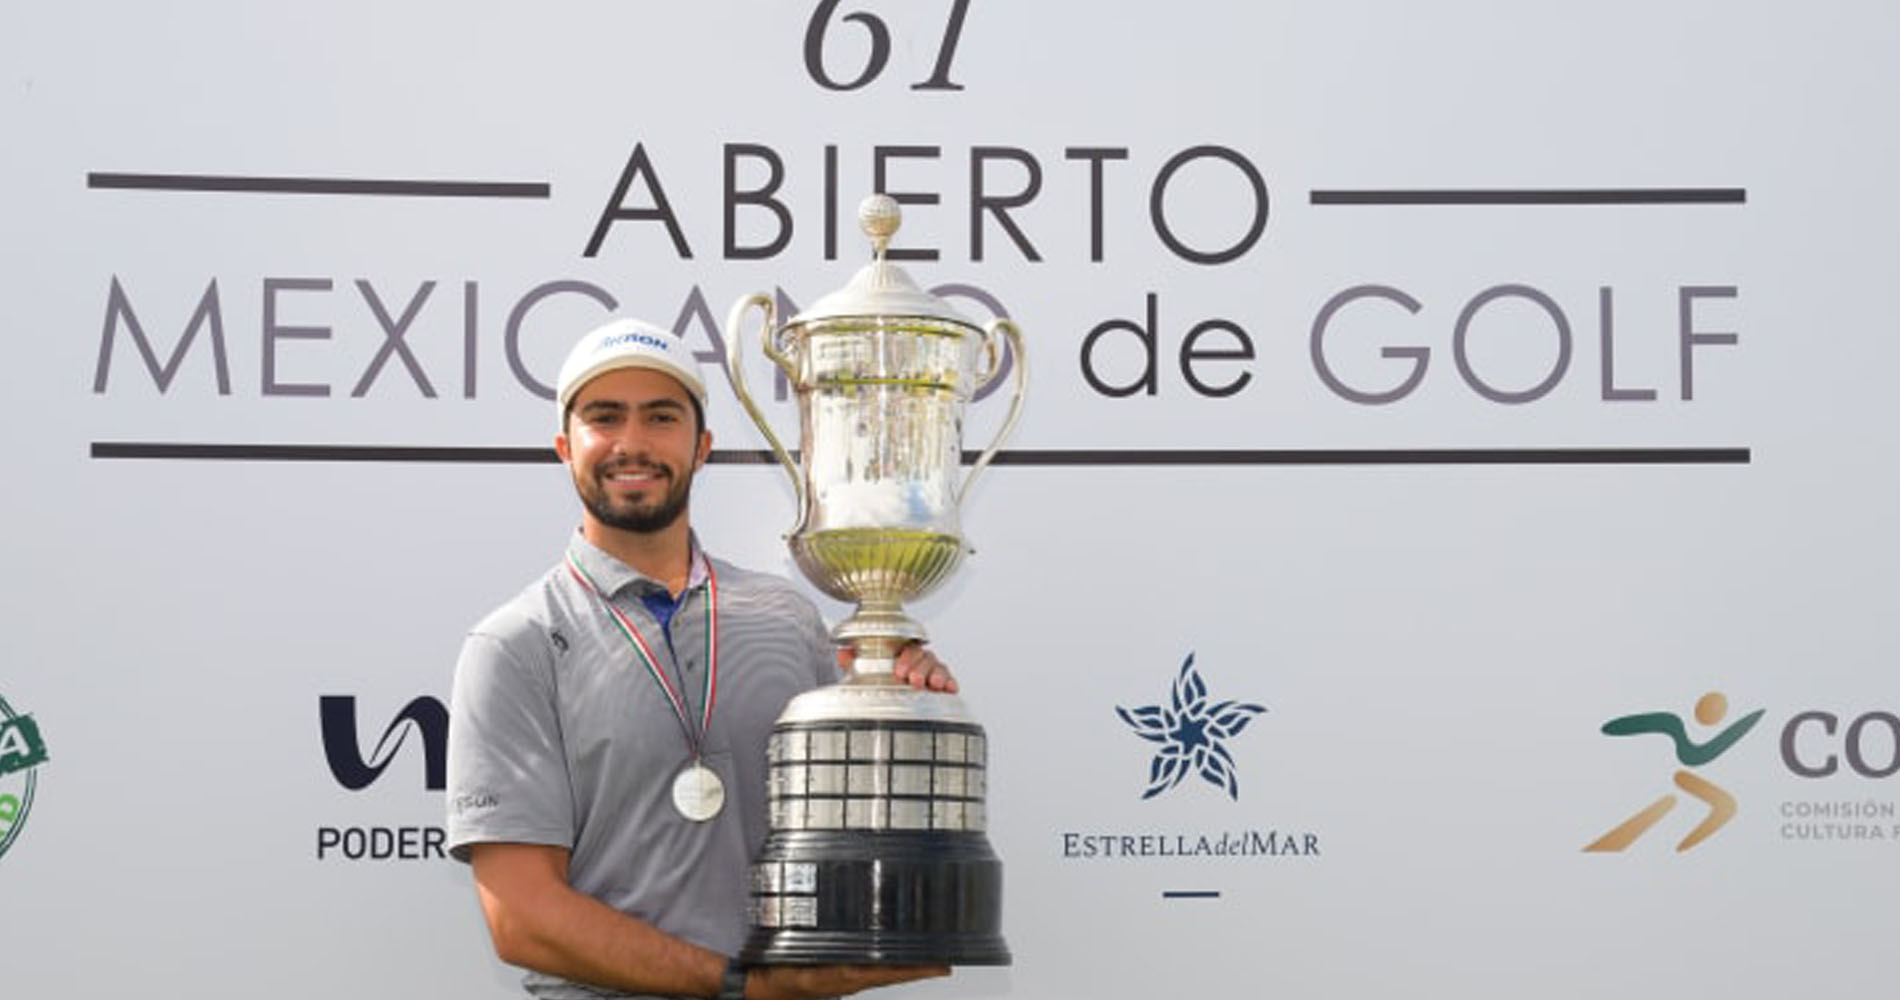 ORTIZ WINS MEXICAN OPEN BY THREE SHOTS